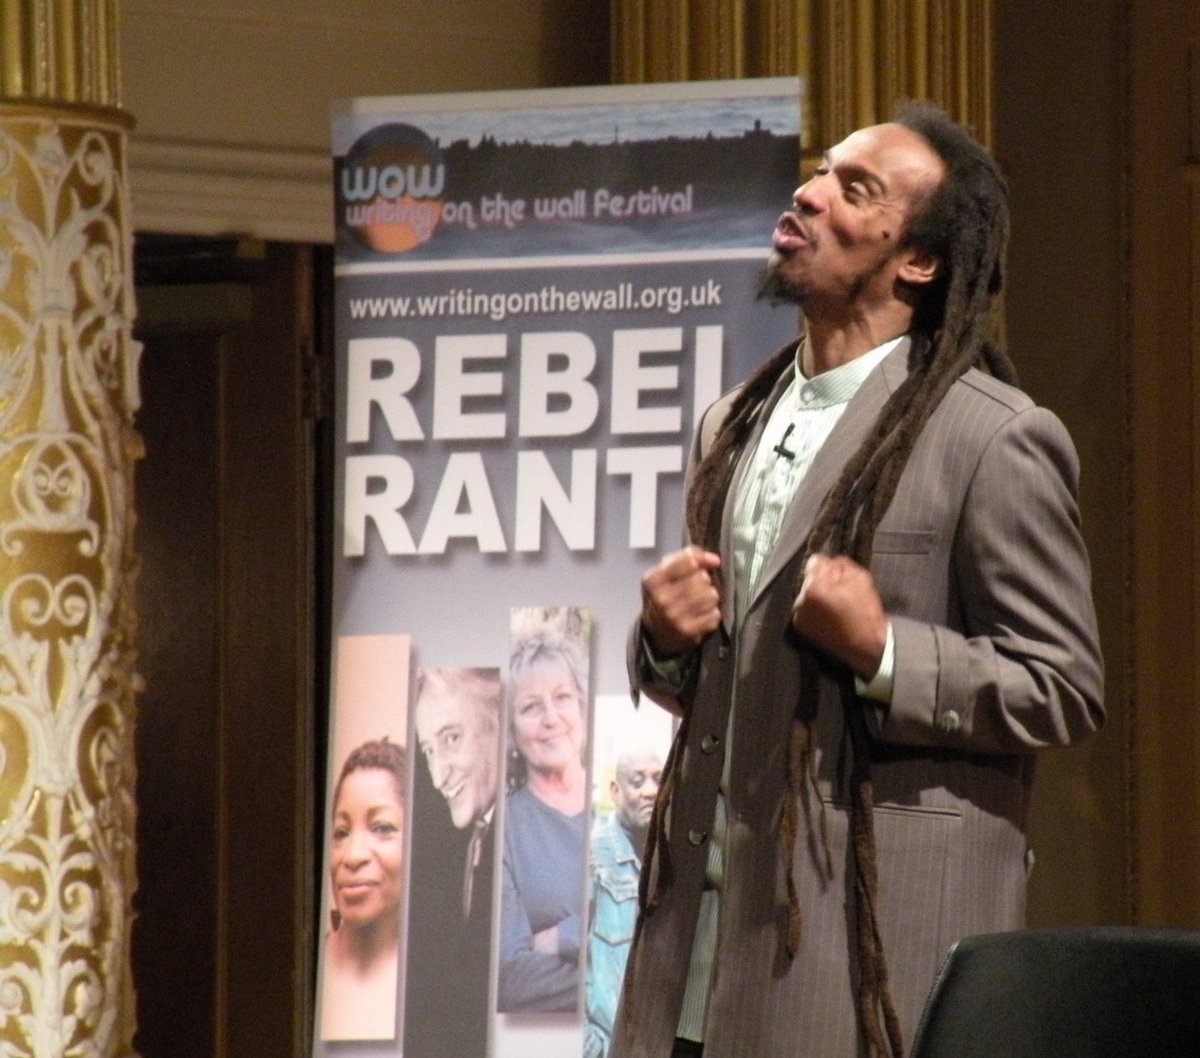 Happy Birthday to the legendary @BZephaniah! Here's a shot of Benjamin delivering a powerful Rebel Rant at WoWFEST 2012. Join us in honouring Benjamin with special guests @MichaelRosenYes & @LeviTafariPoet on May 9th at @The_Palmhouse.